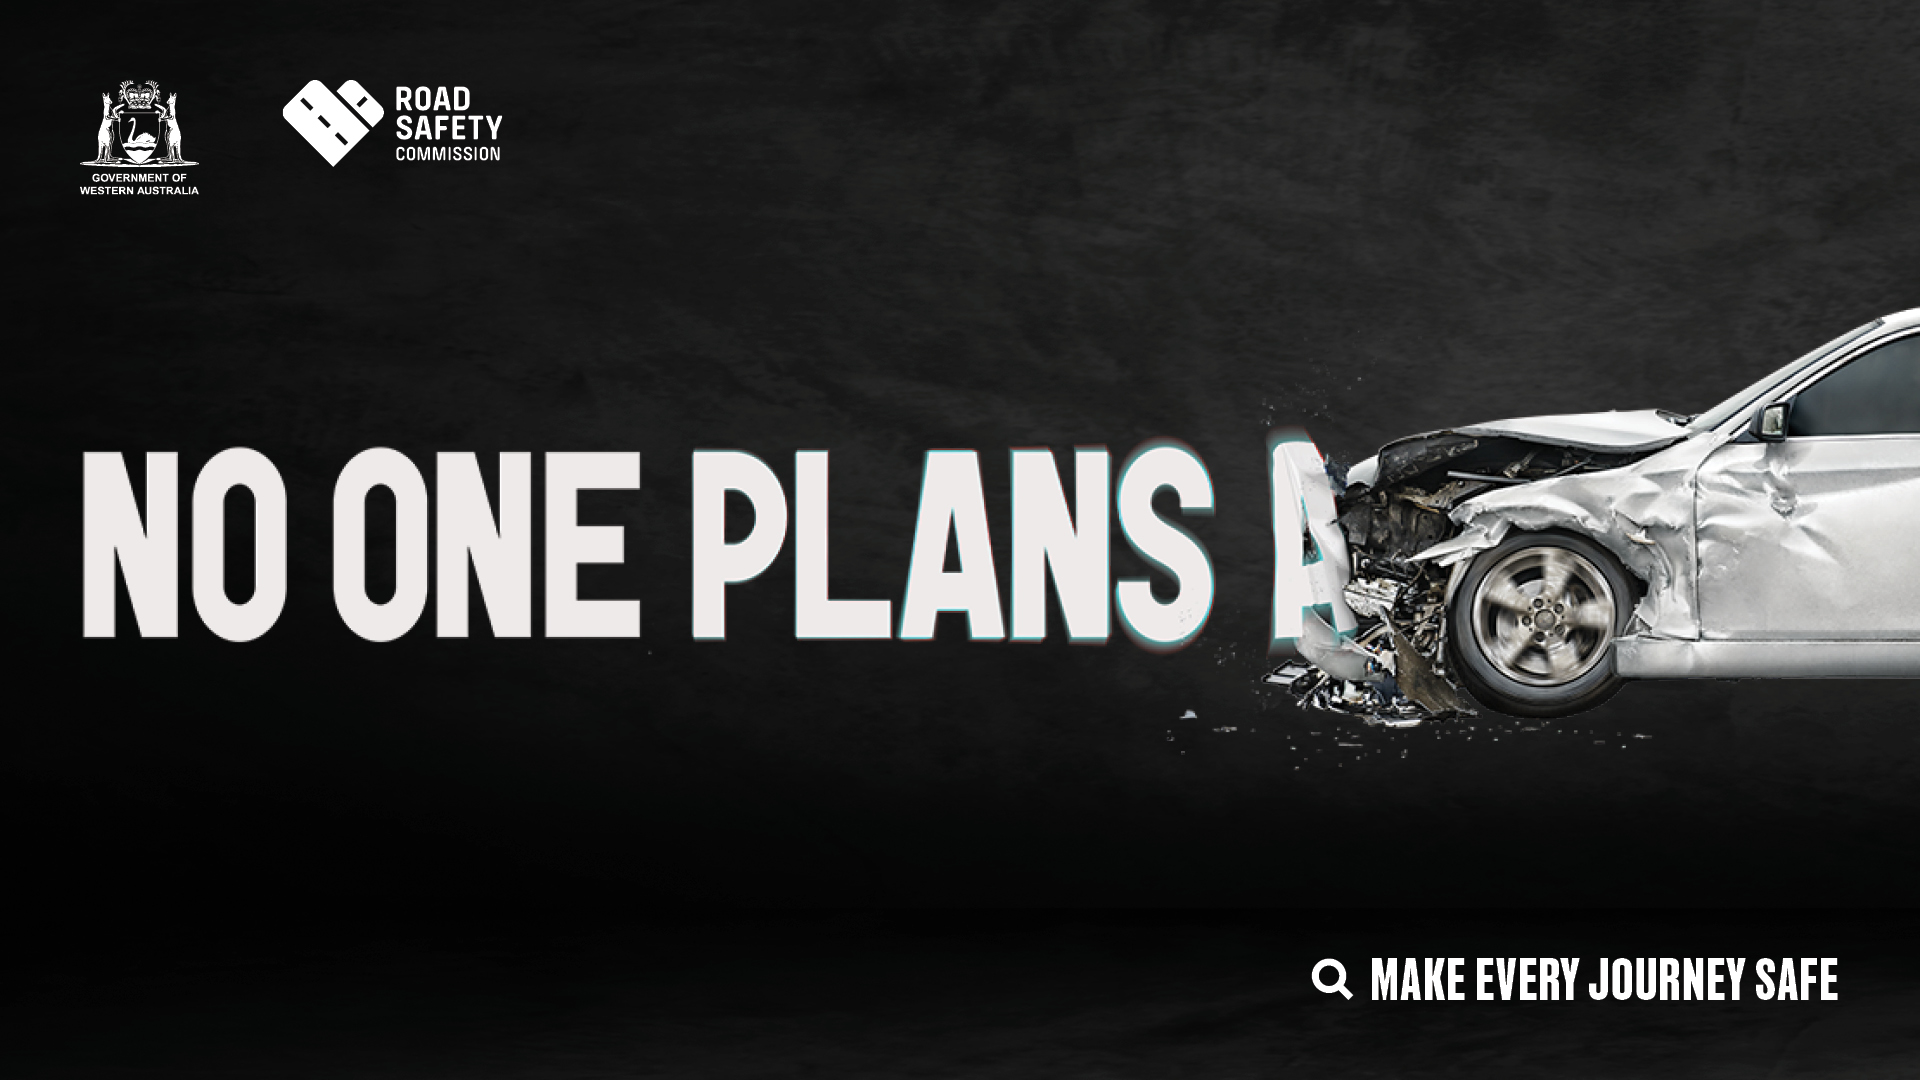 No one plans a crash (white text on black background) next to a car with its bonnet smashed in